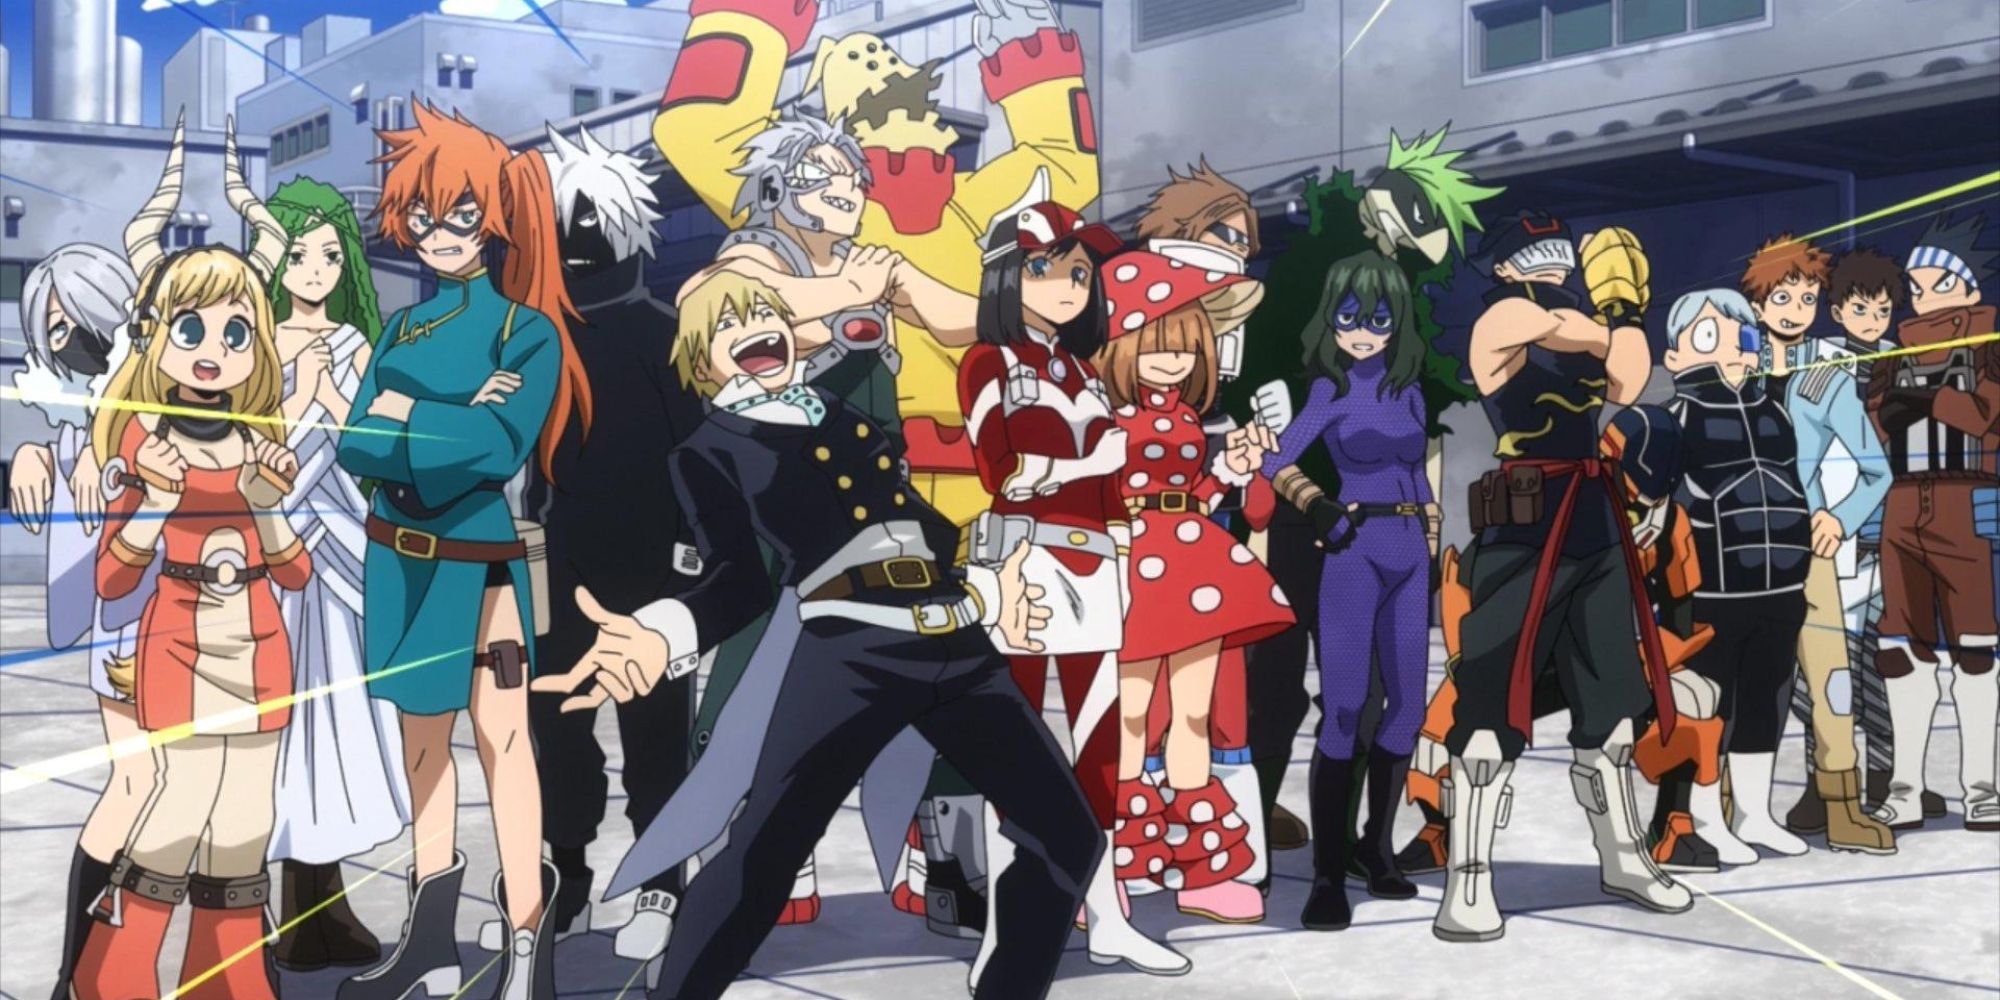 All of the students from Class 1-B get ready to fight against Class 1-A.